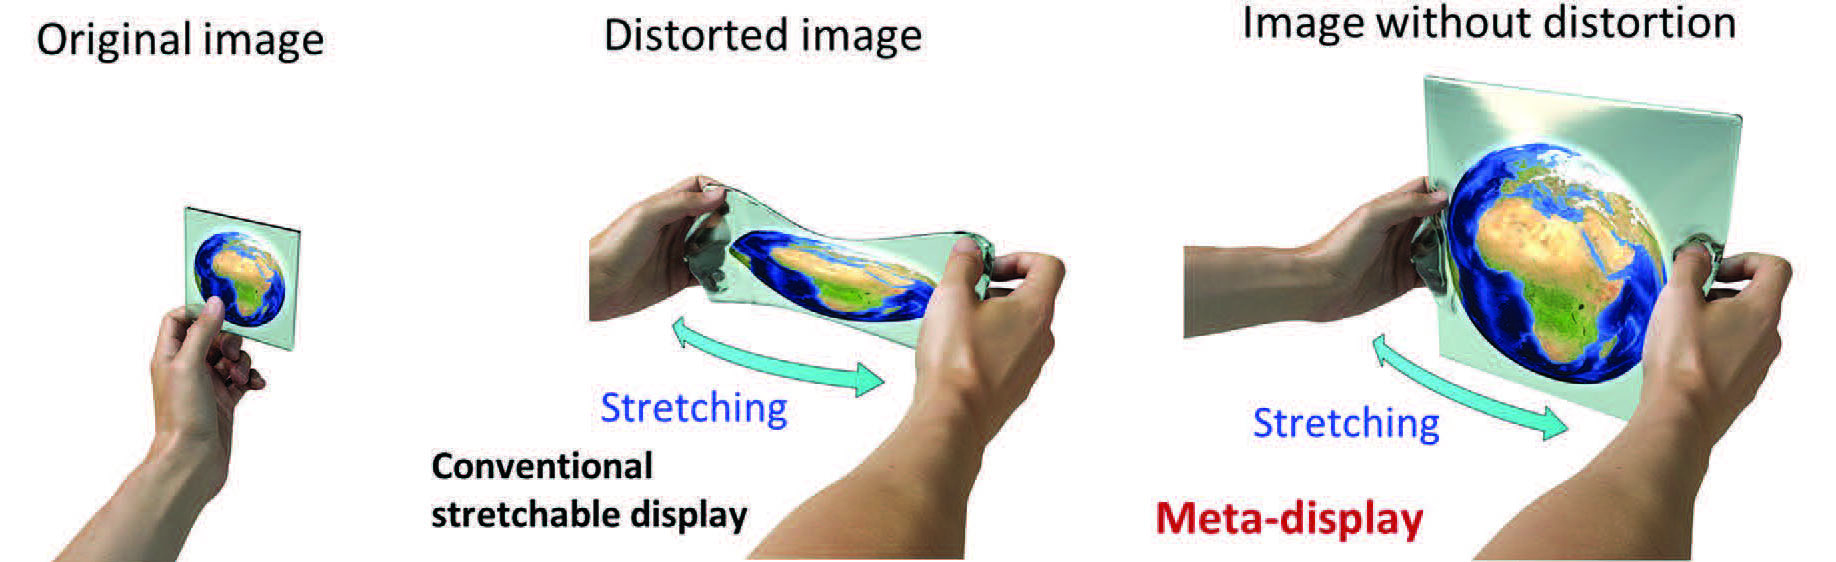 Illustrations of conventional stretchable display with the distorted Earth image and meta-display without image distortion under uniaxial stretching